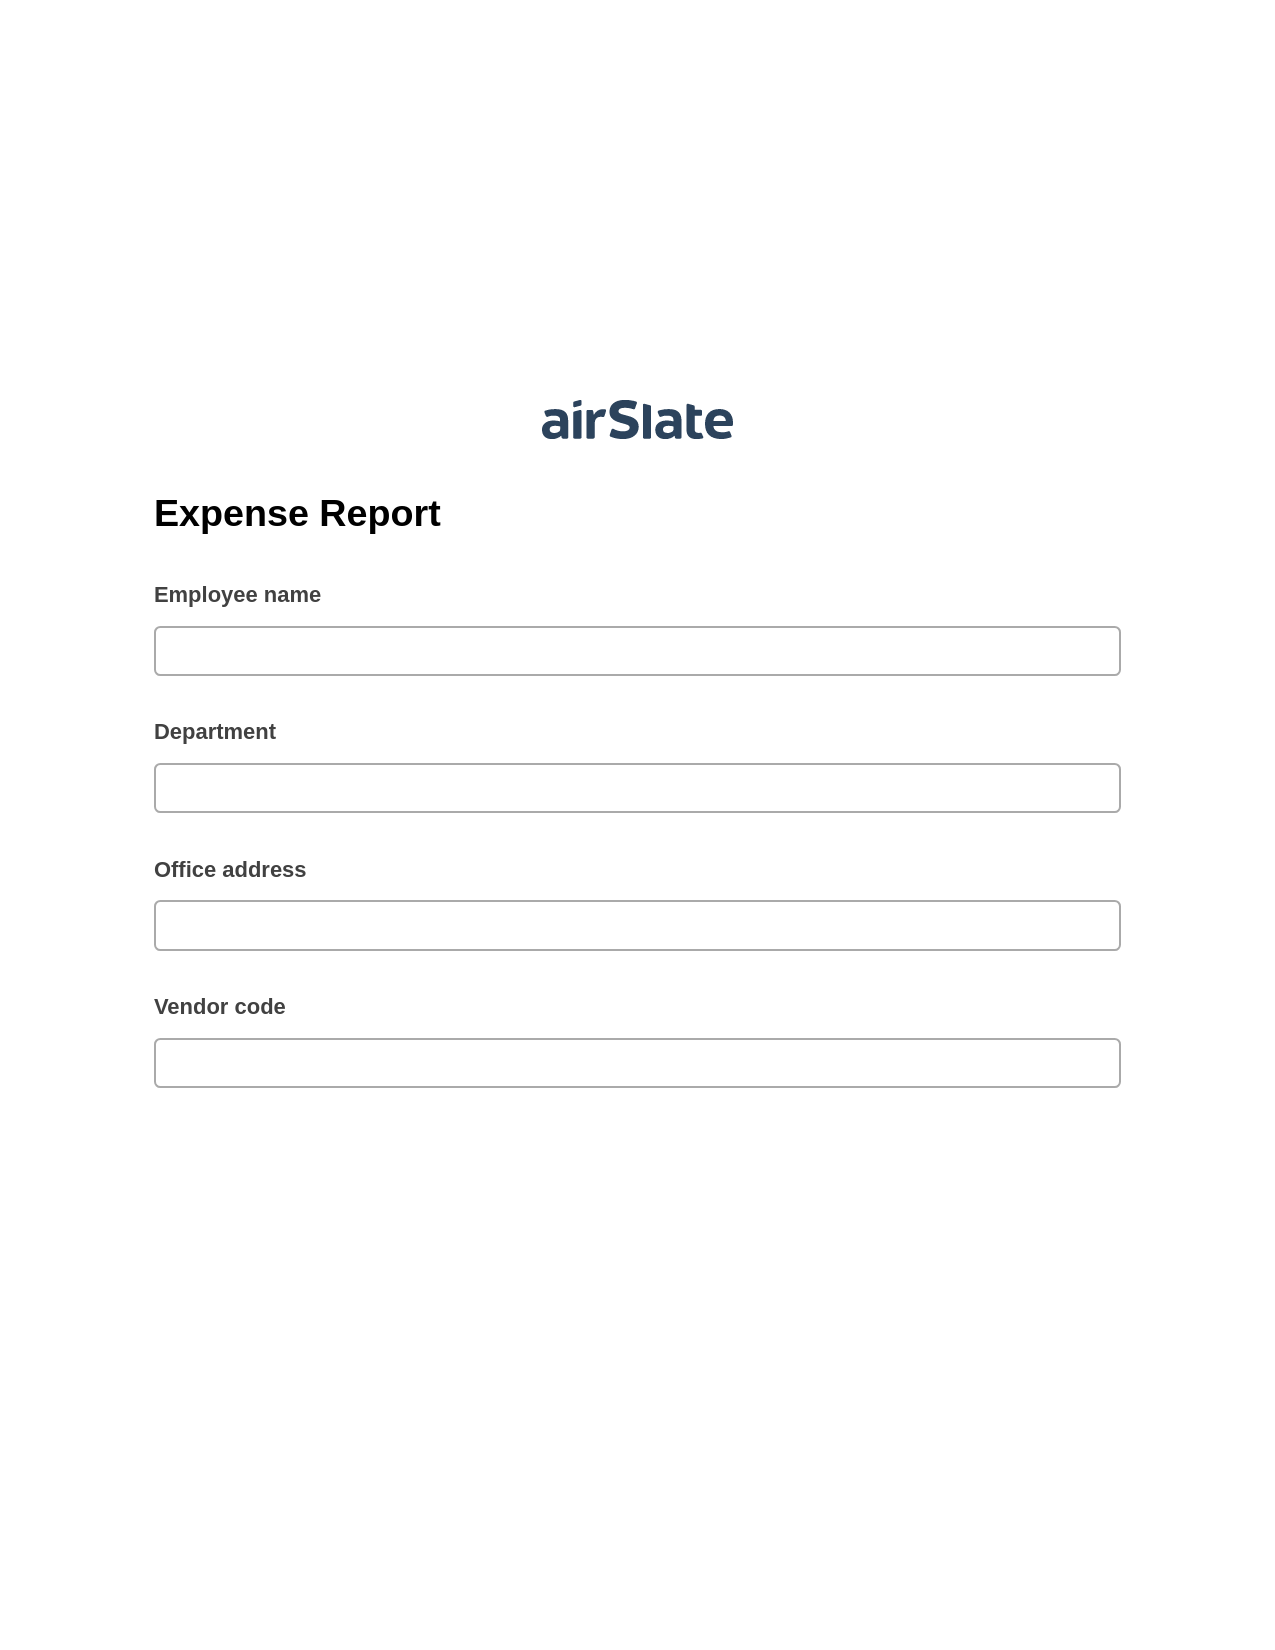 Expense Report Pre-fill Dropdown from Airtable, Jira Bot, Export to Excel 365 Bot